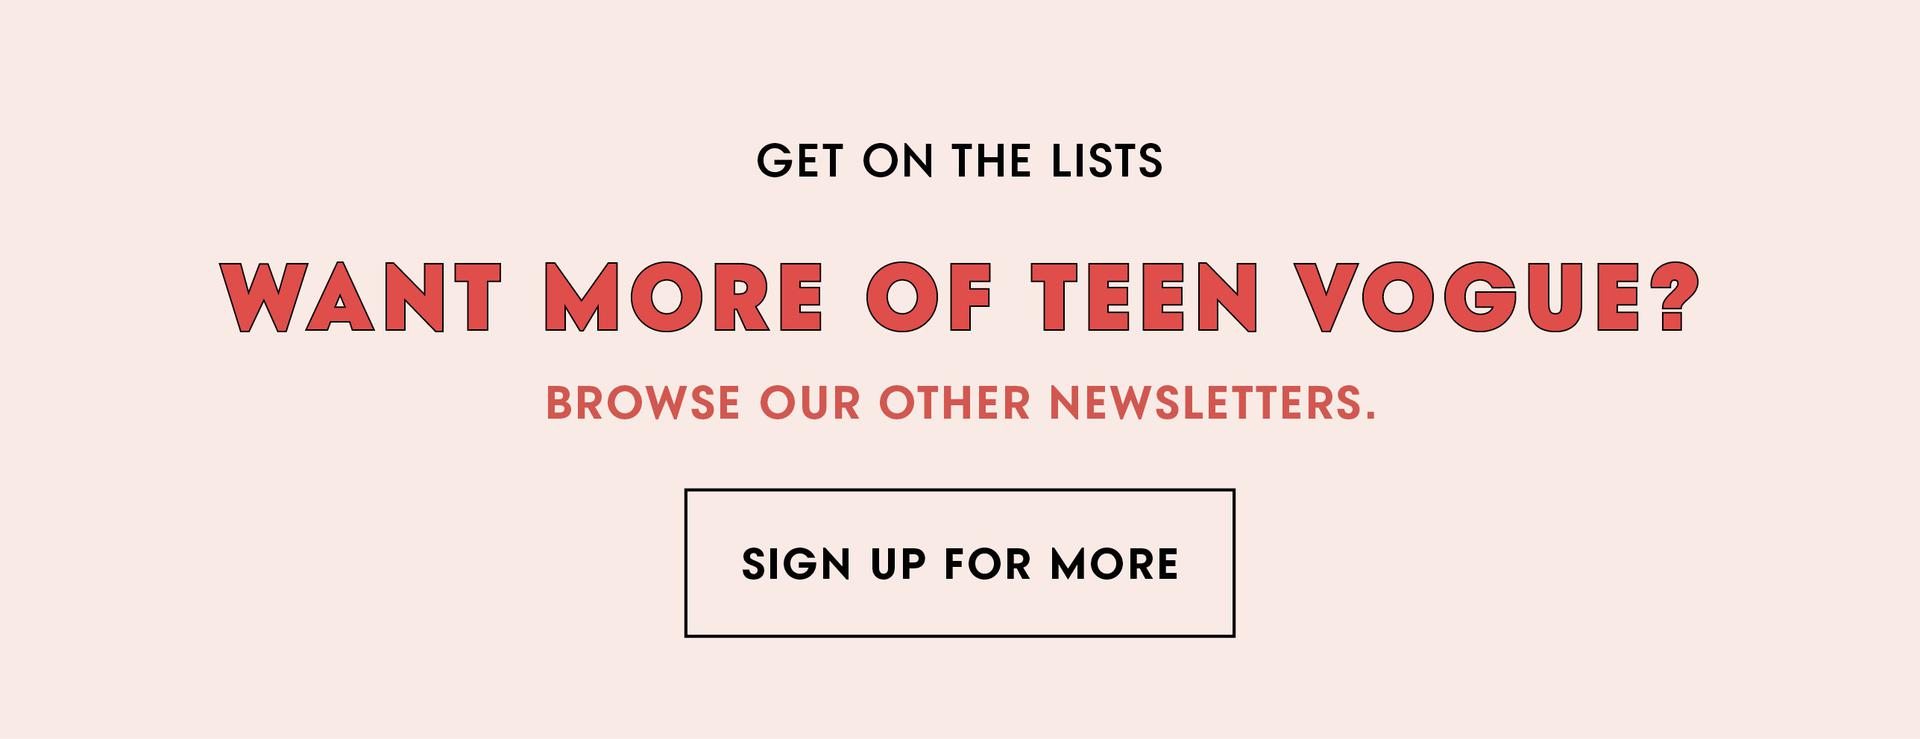 (image) Get On The Lists ... Want More of Teen Vogue? Browse Our Other Newsletters. Sign Up For More!